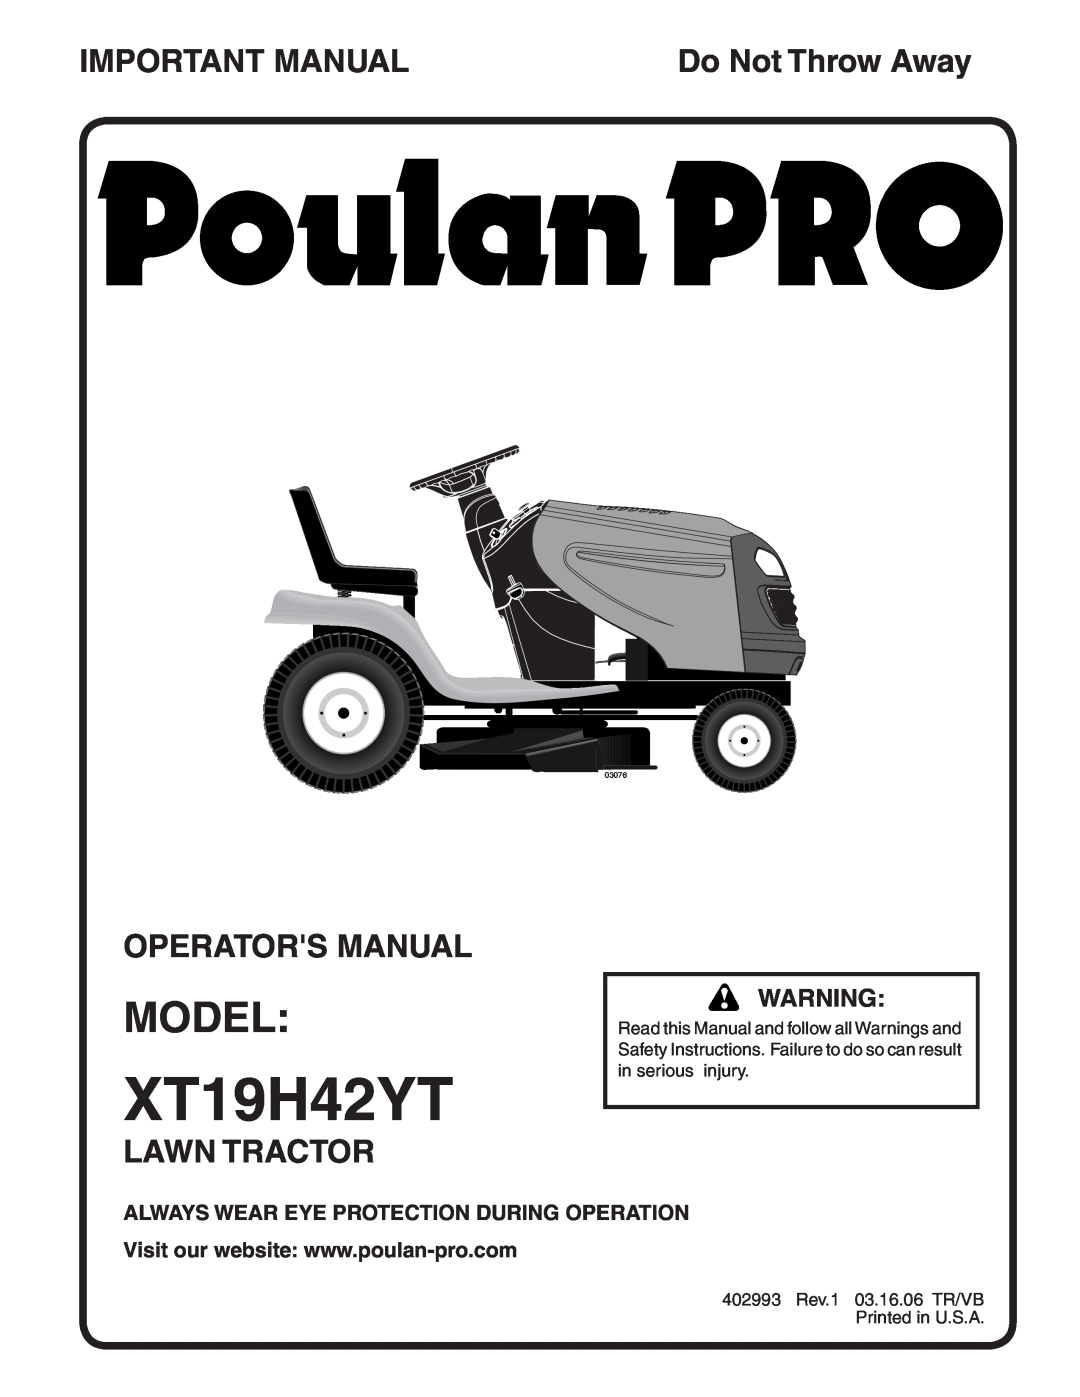 Poulan 402993 manual Model, Important Manual, Operators Manual, Lawn Tractor, Always Wear Eye Protection During Operation 